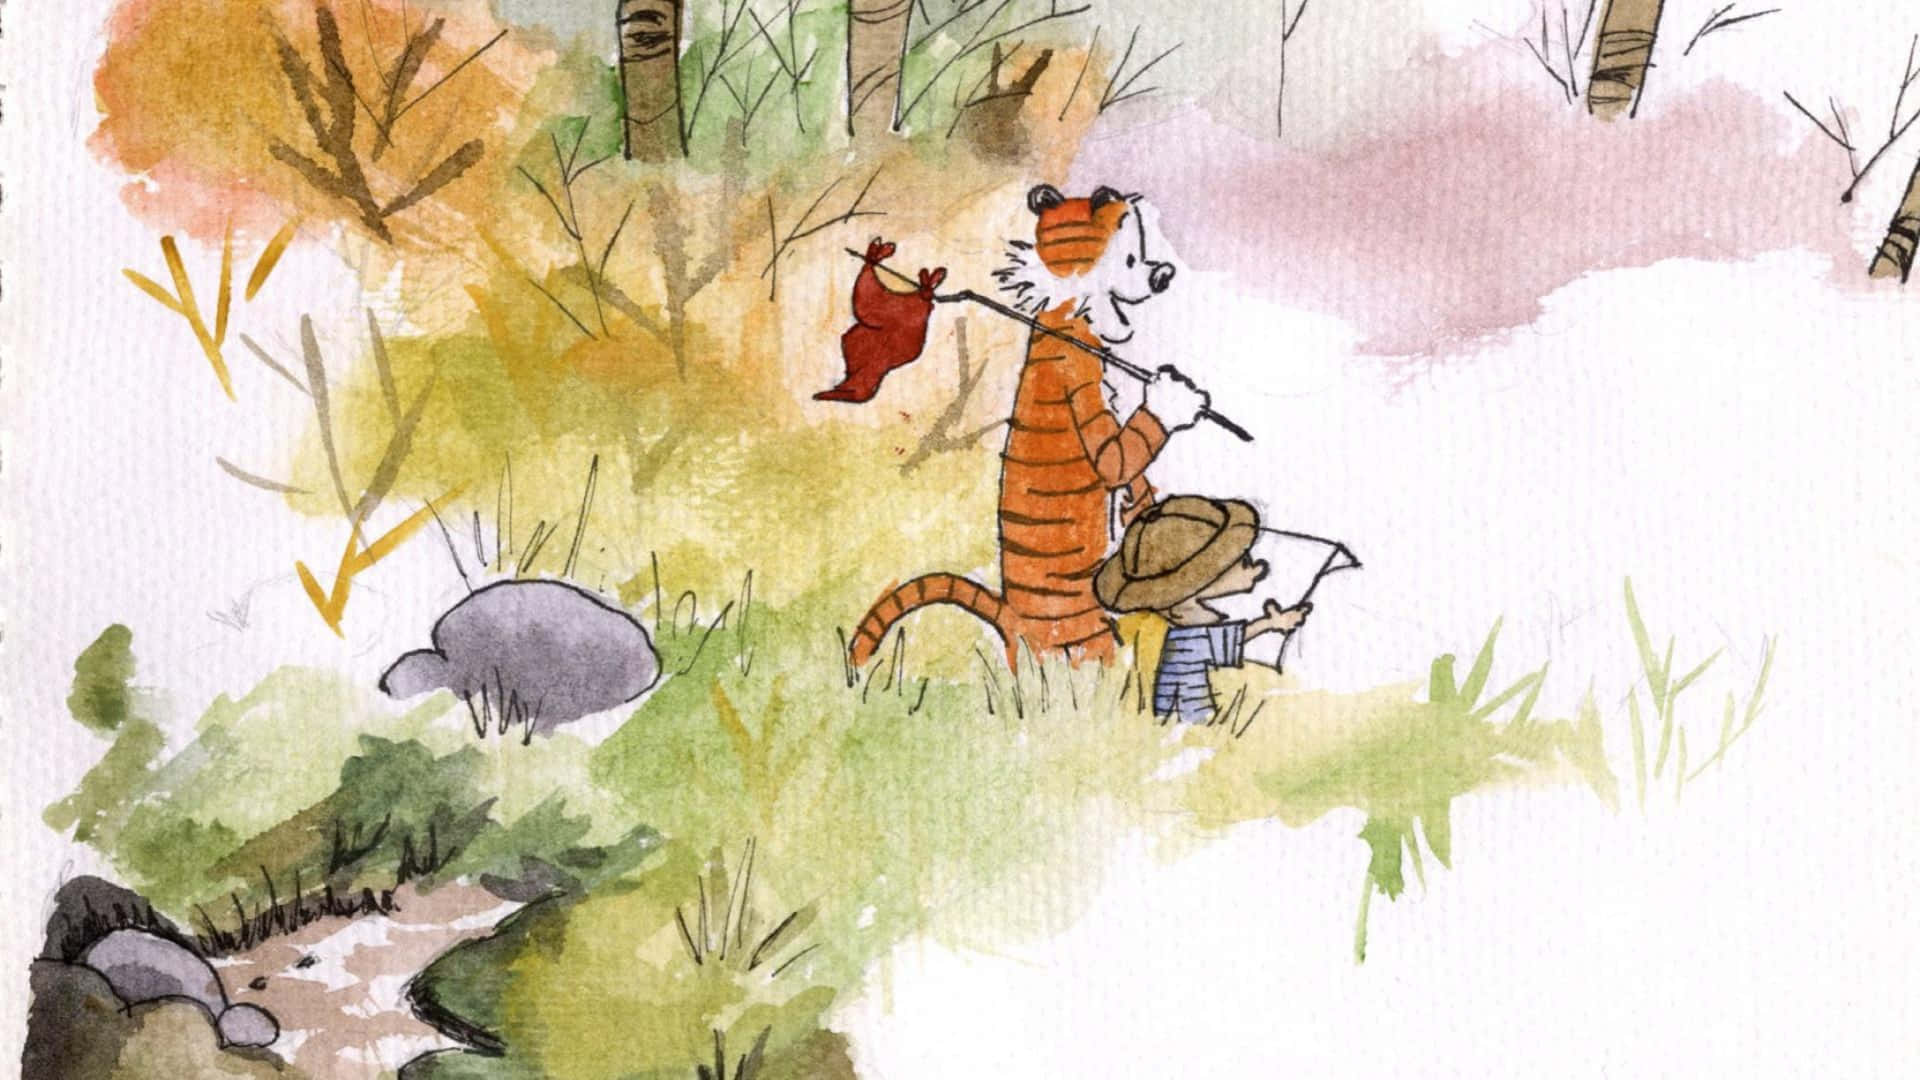 A Watercolor Painting Of A Tiger And A Boy In The Woods Wallpaper